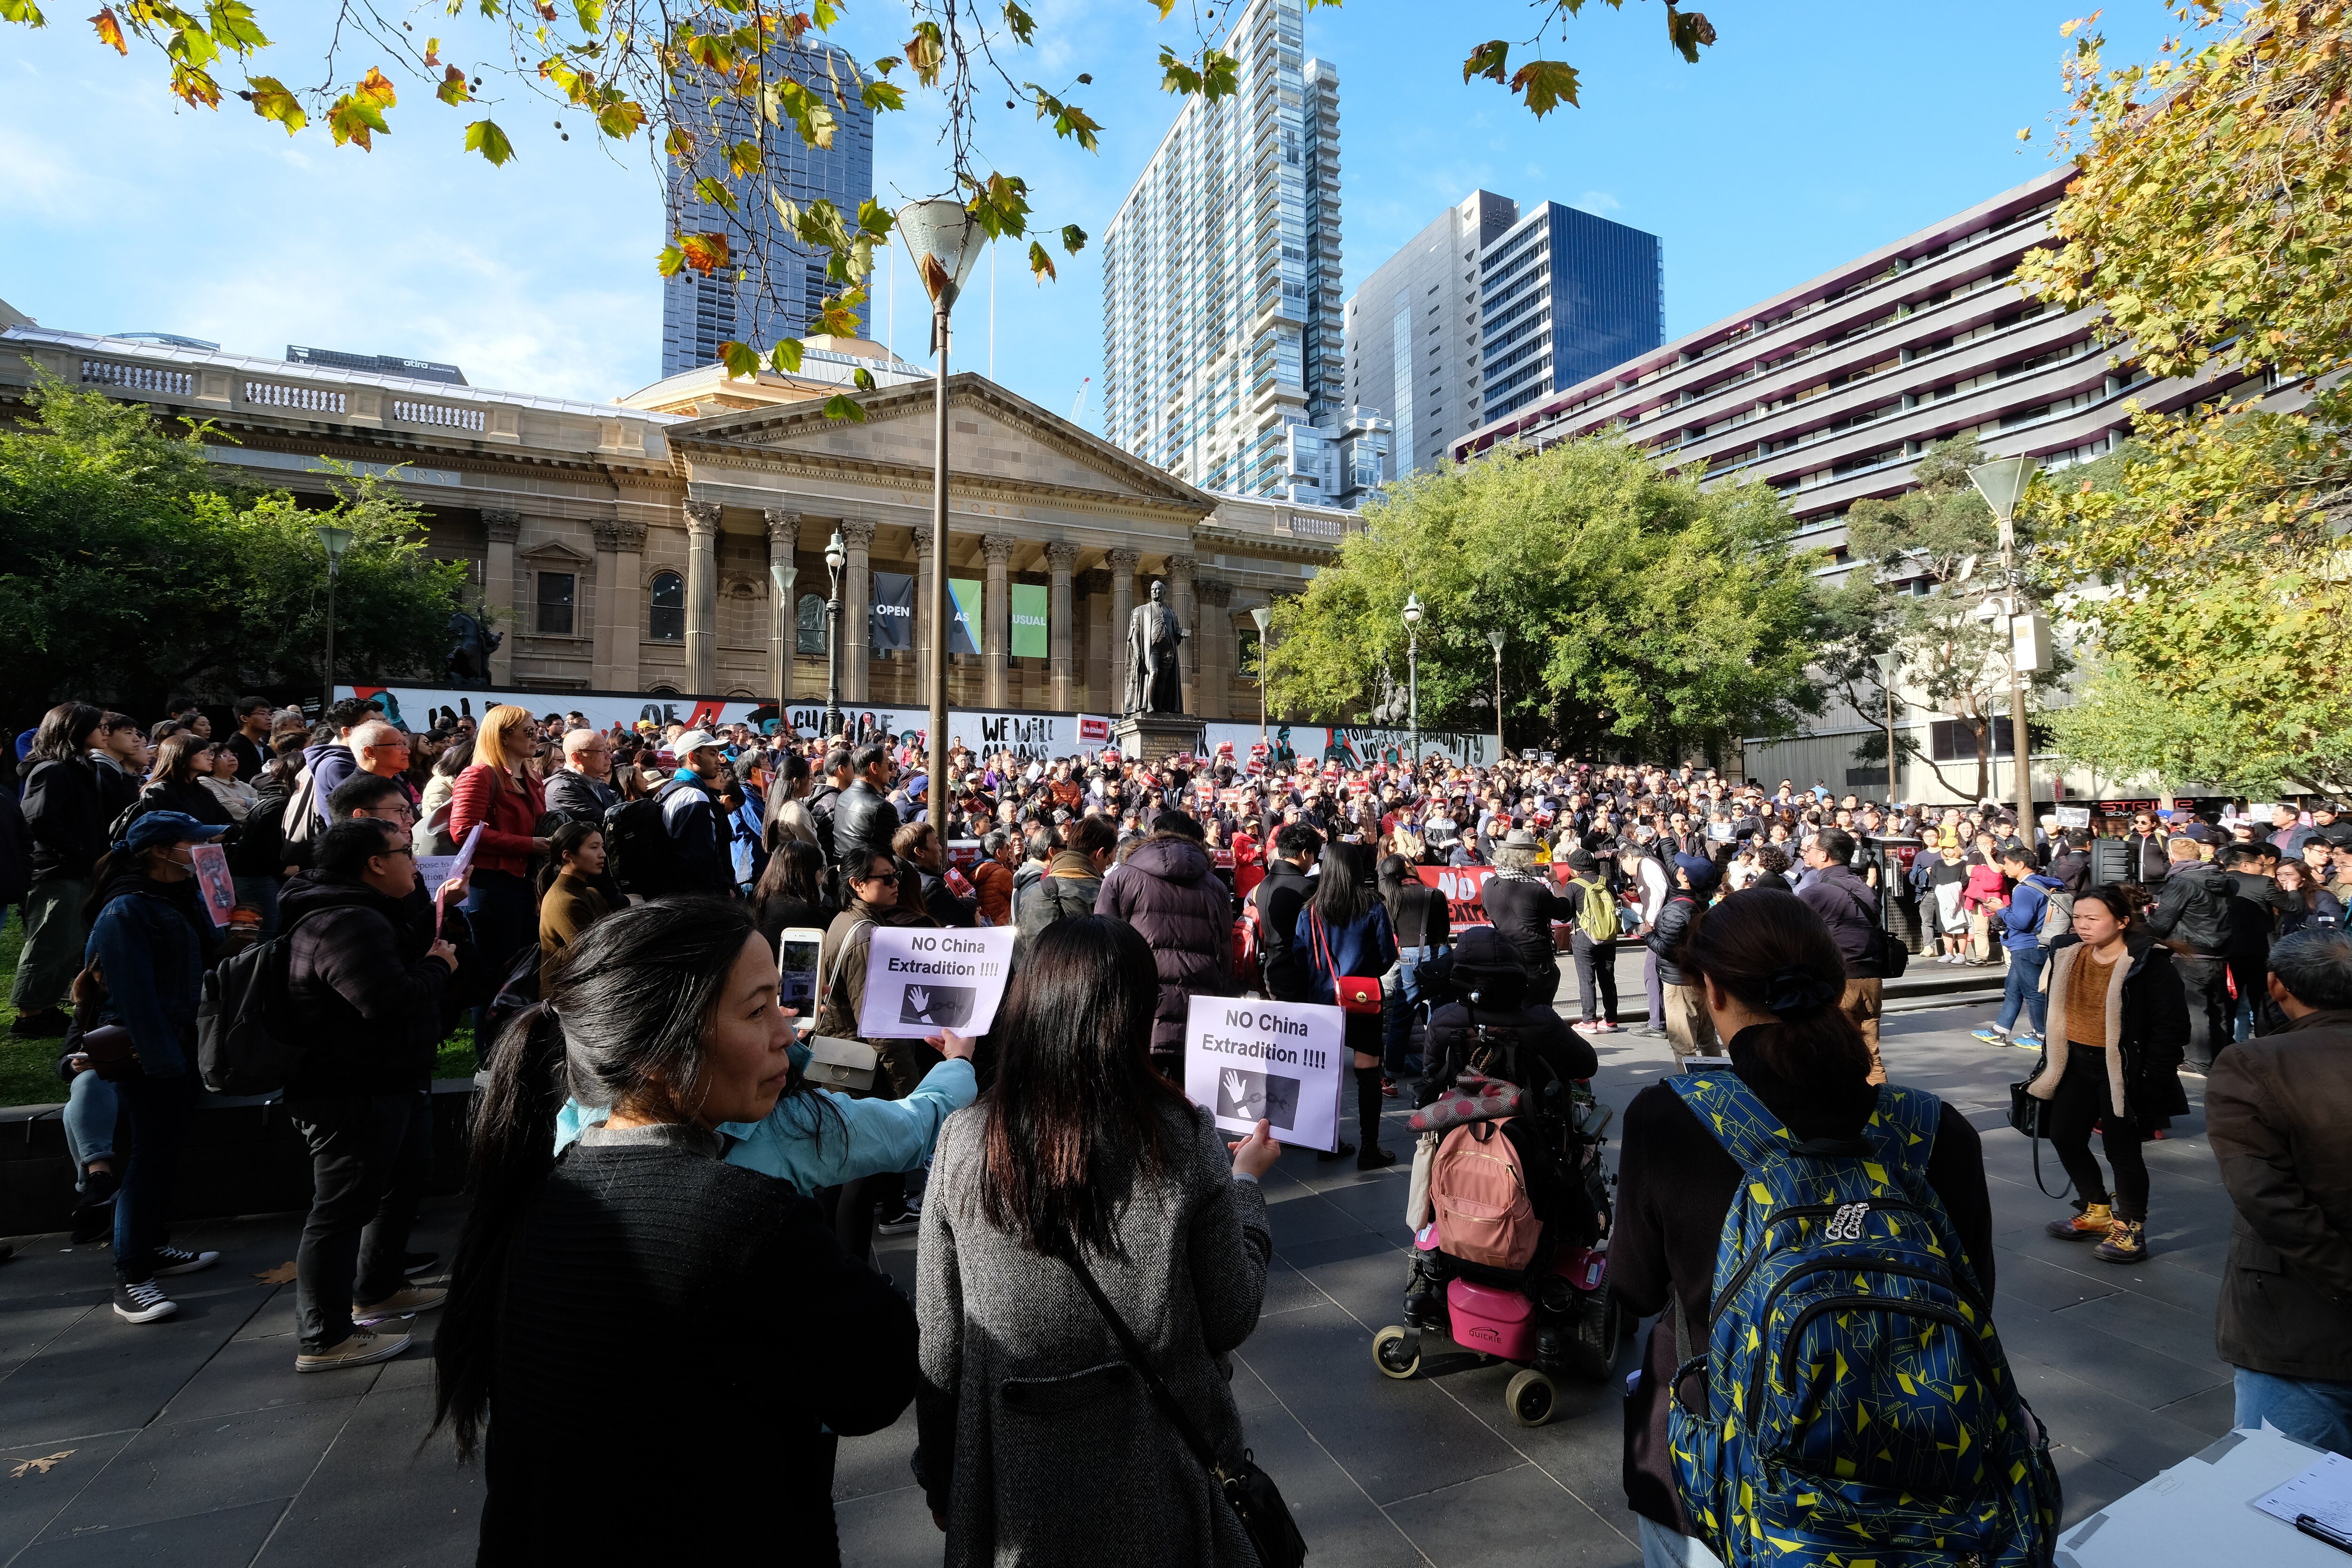 No China Extradition Protest in Melbourne